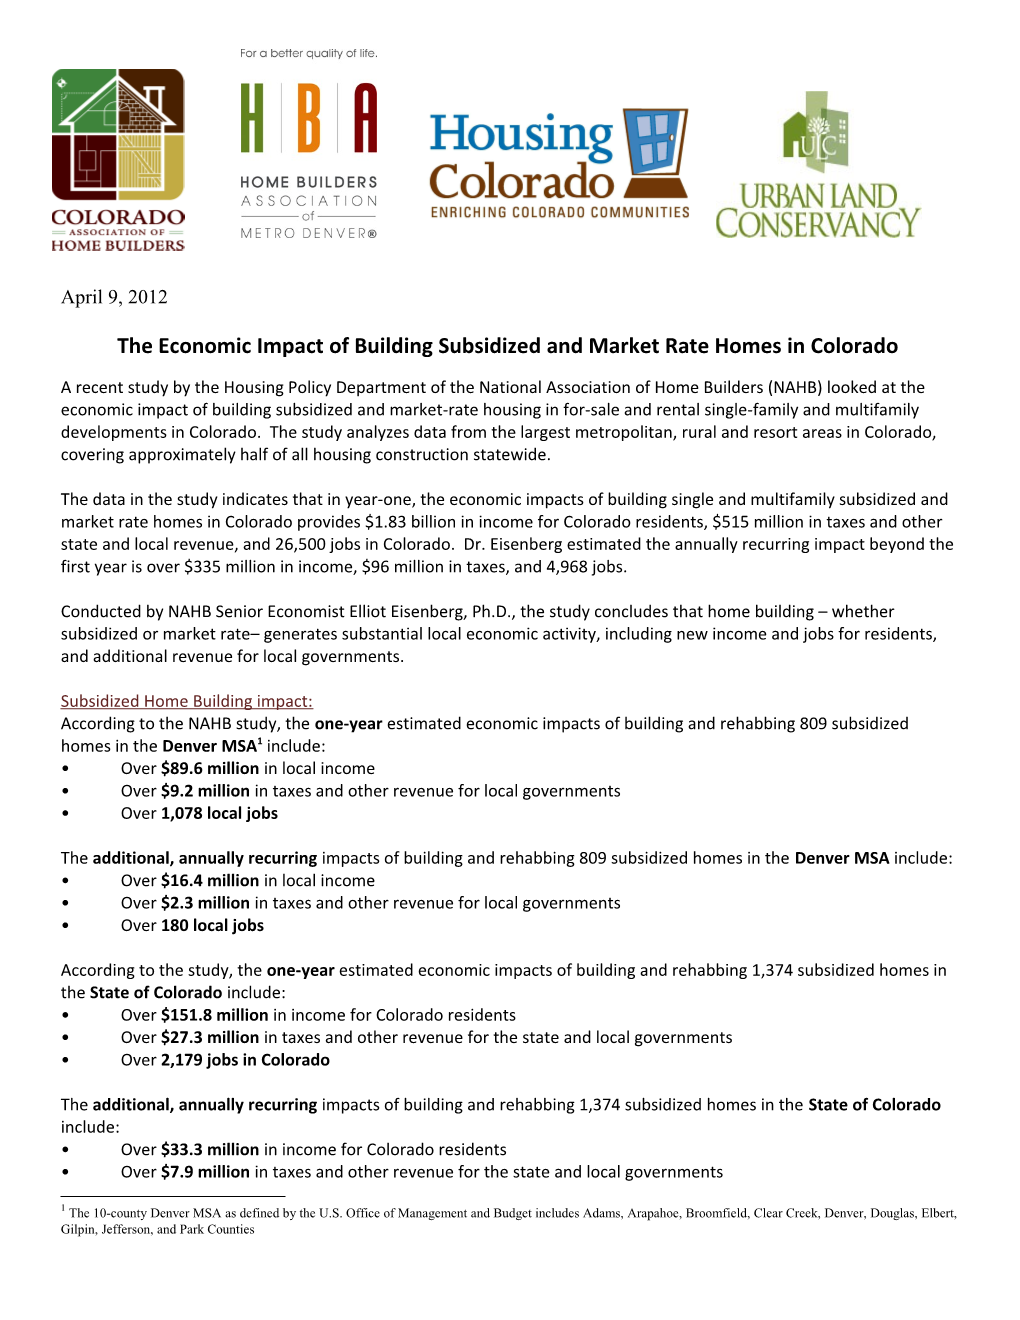 The Economic Impact of Building Subsidized and Market Rate Homes in Colorado